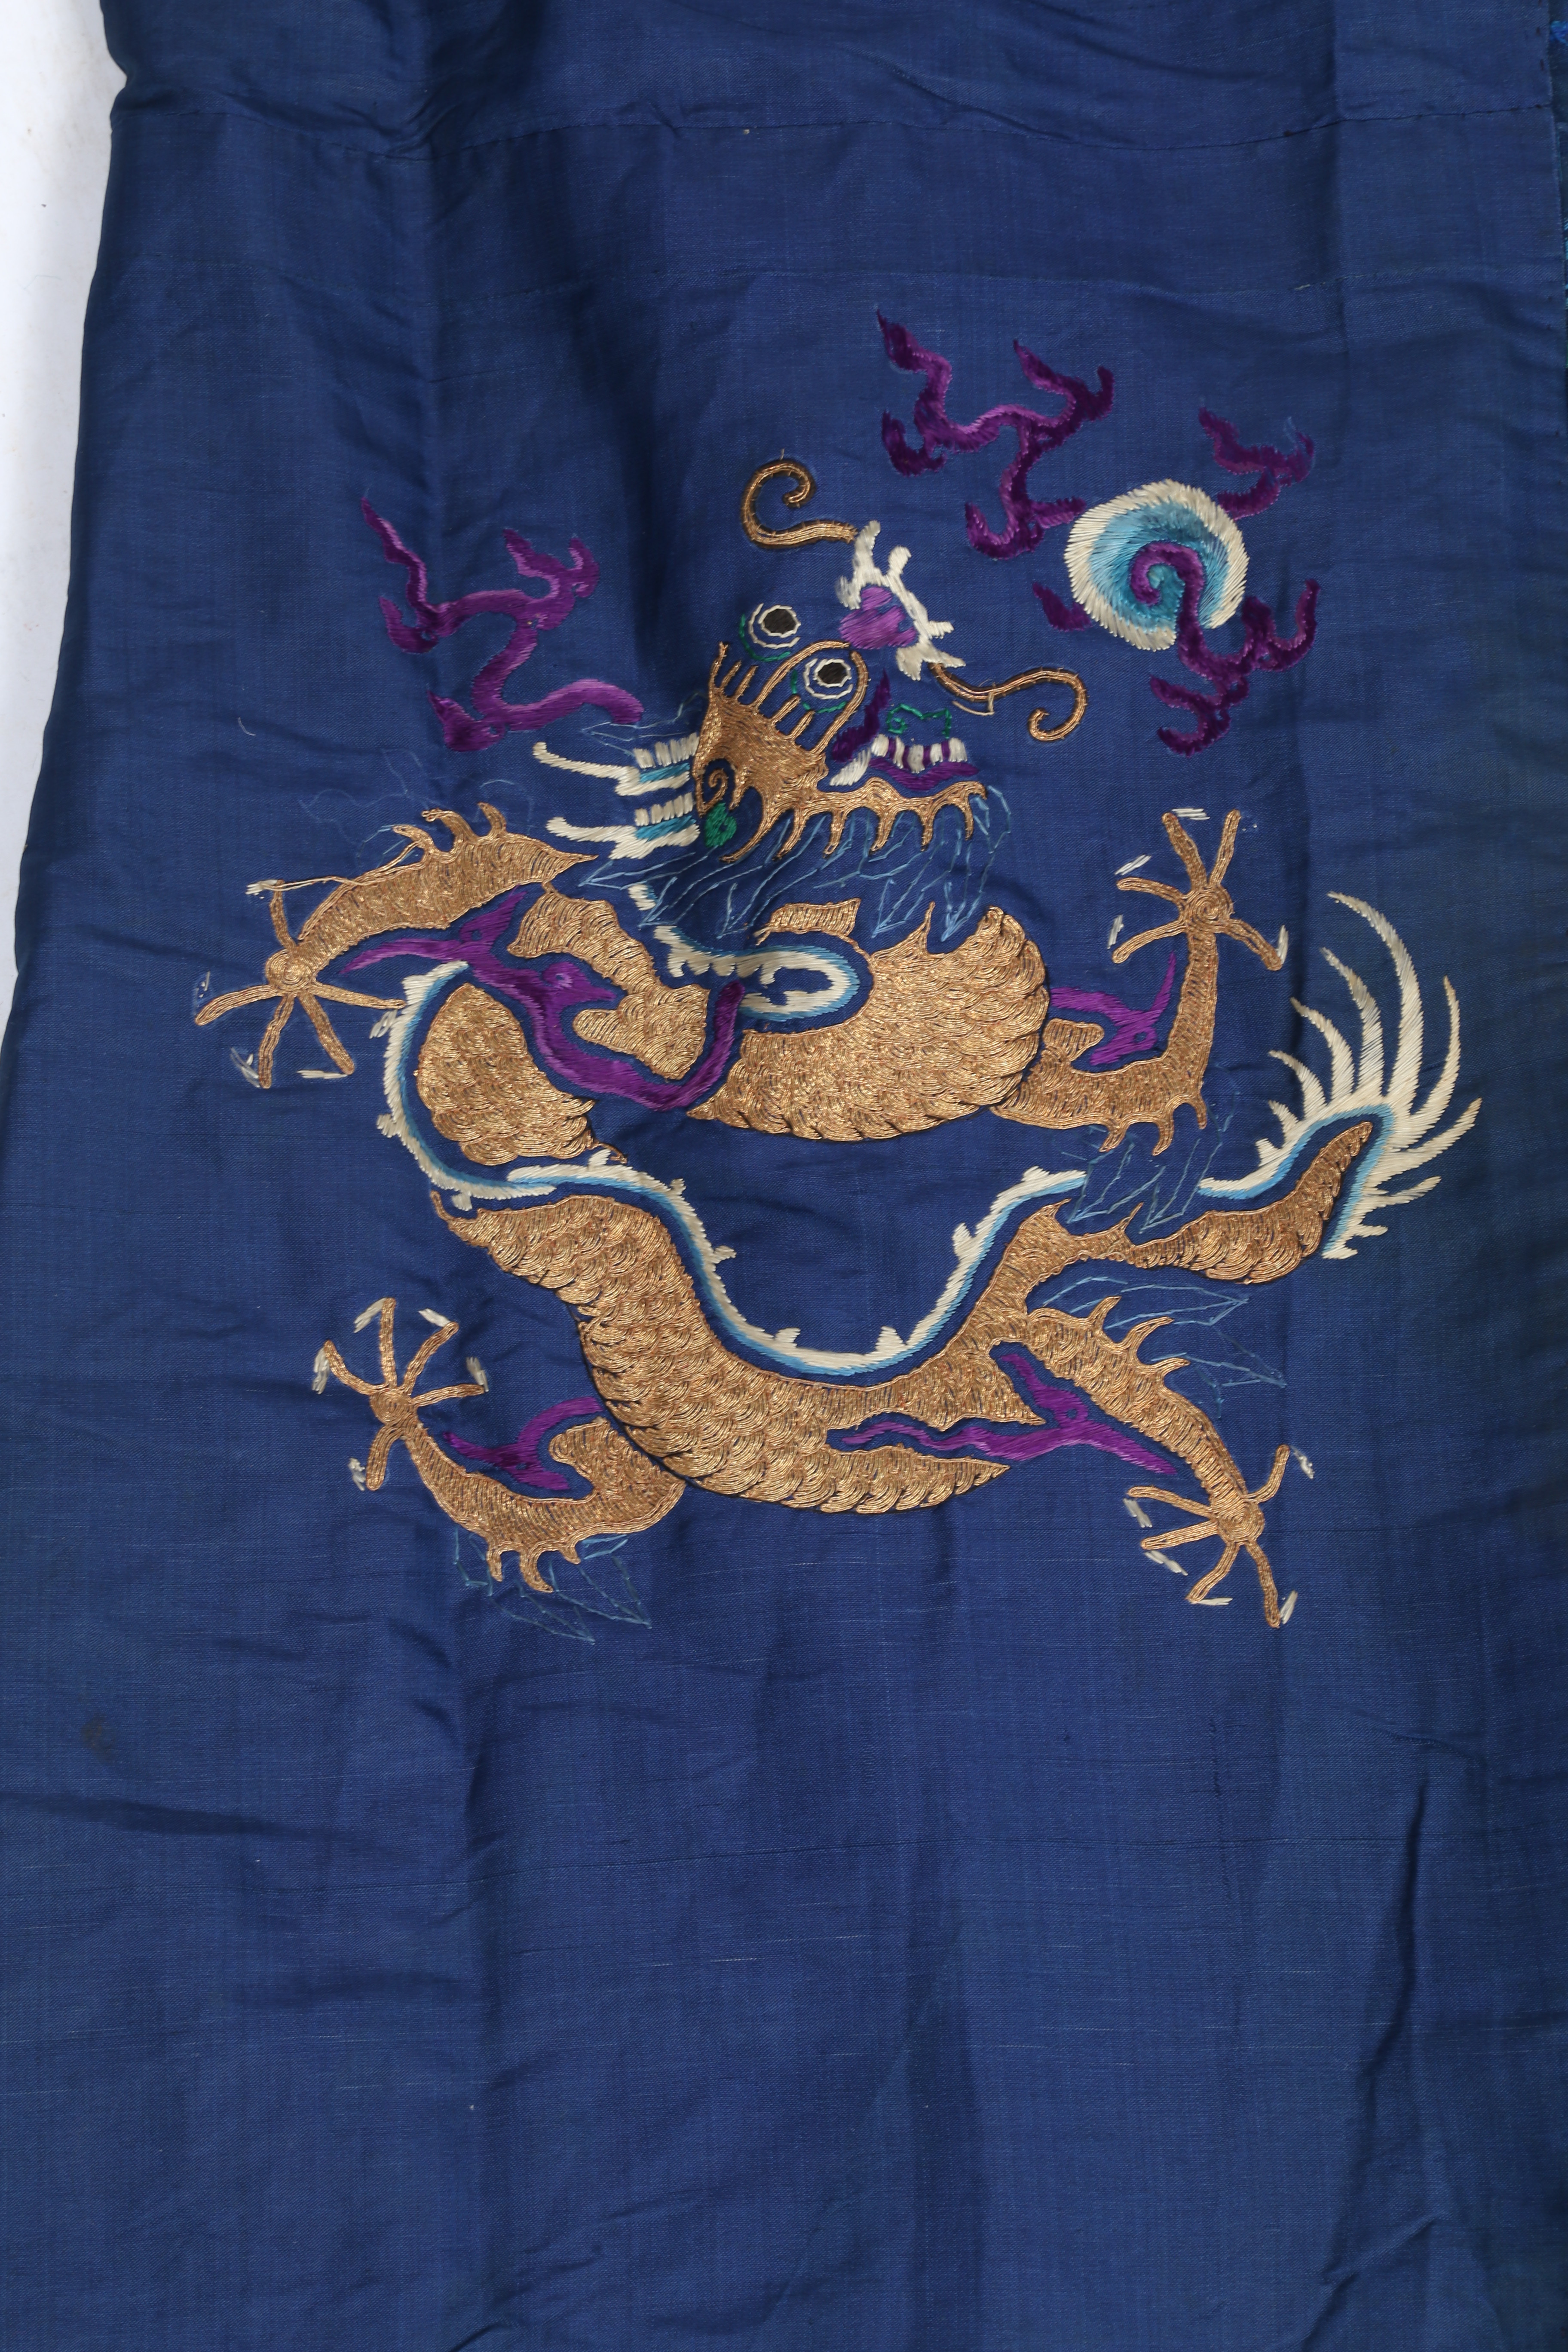 A CHINESE EMBROIDERED 'JI FU' COURT ROBE, LATE QING DYNASTY. - Image 5 of 9